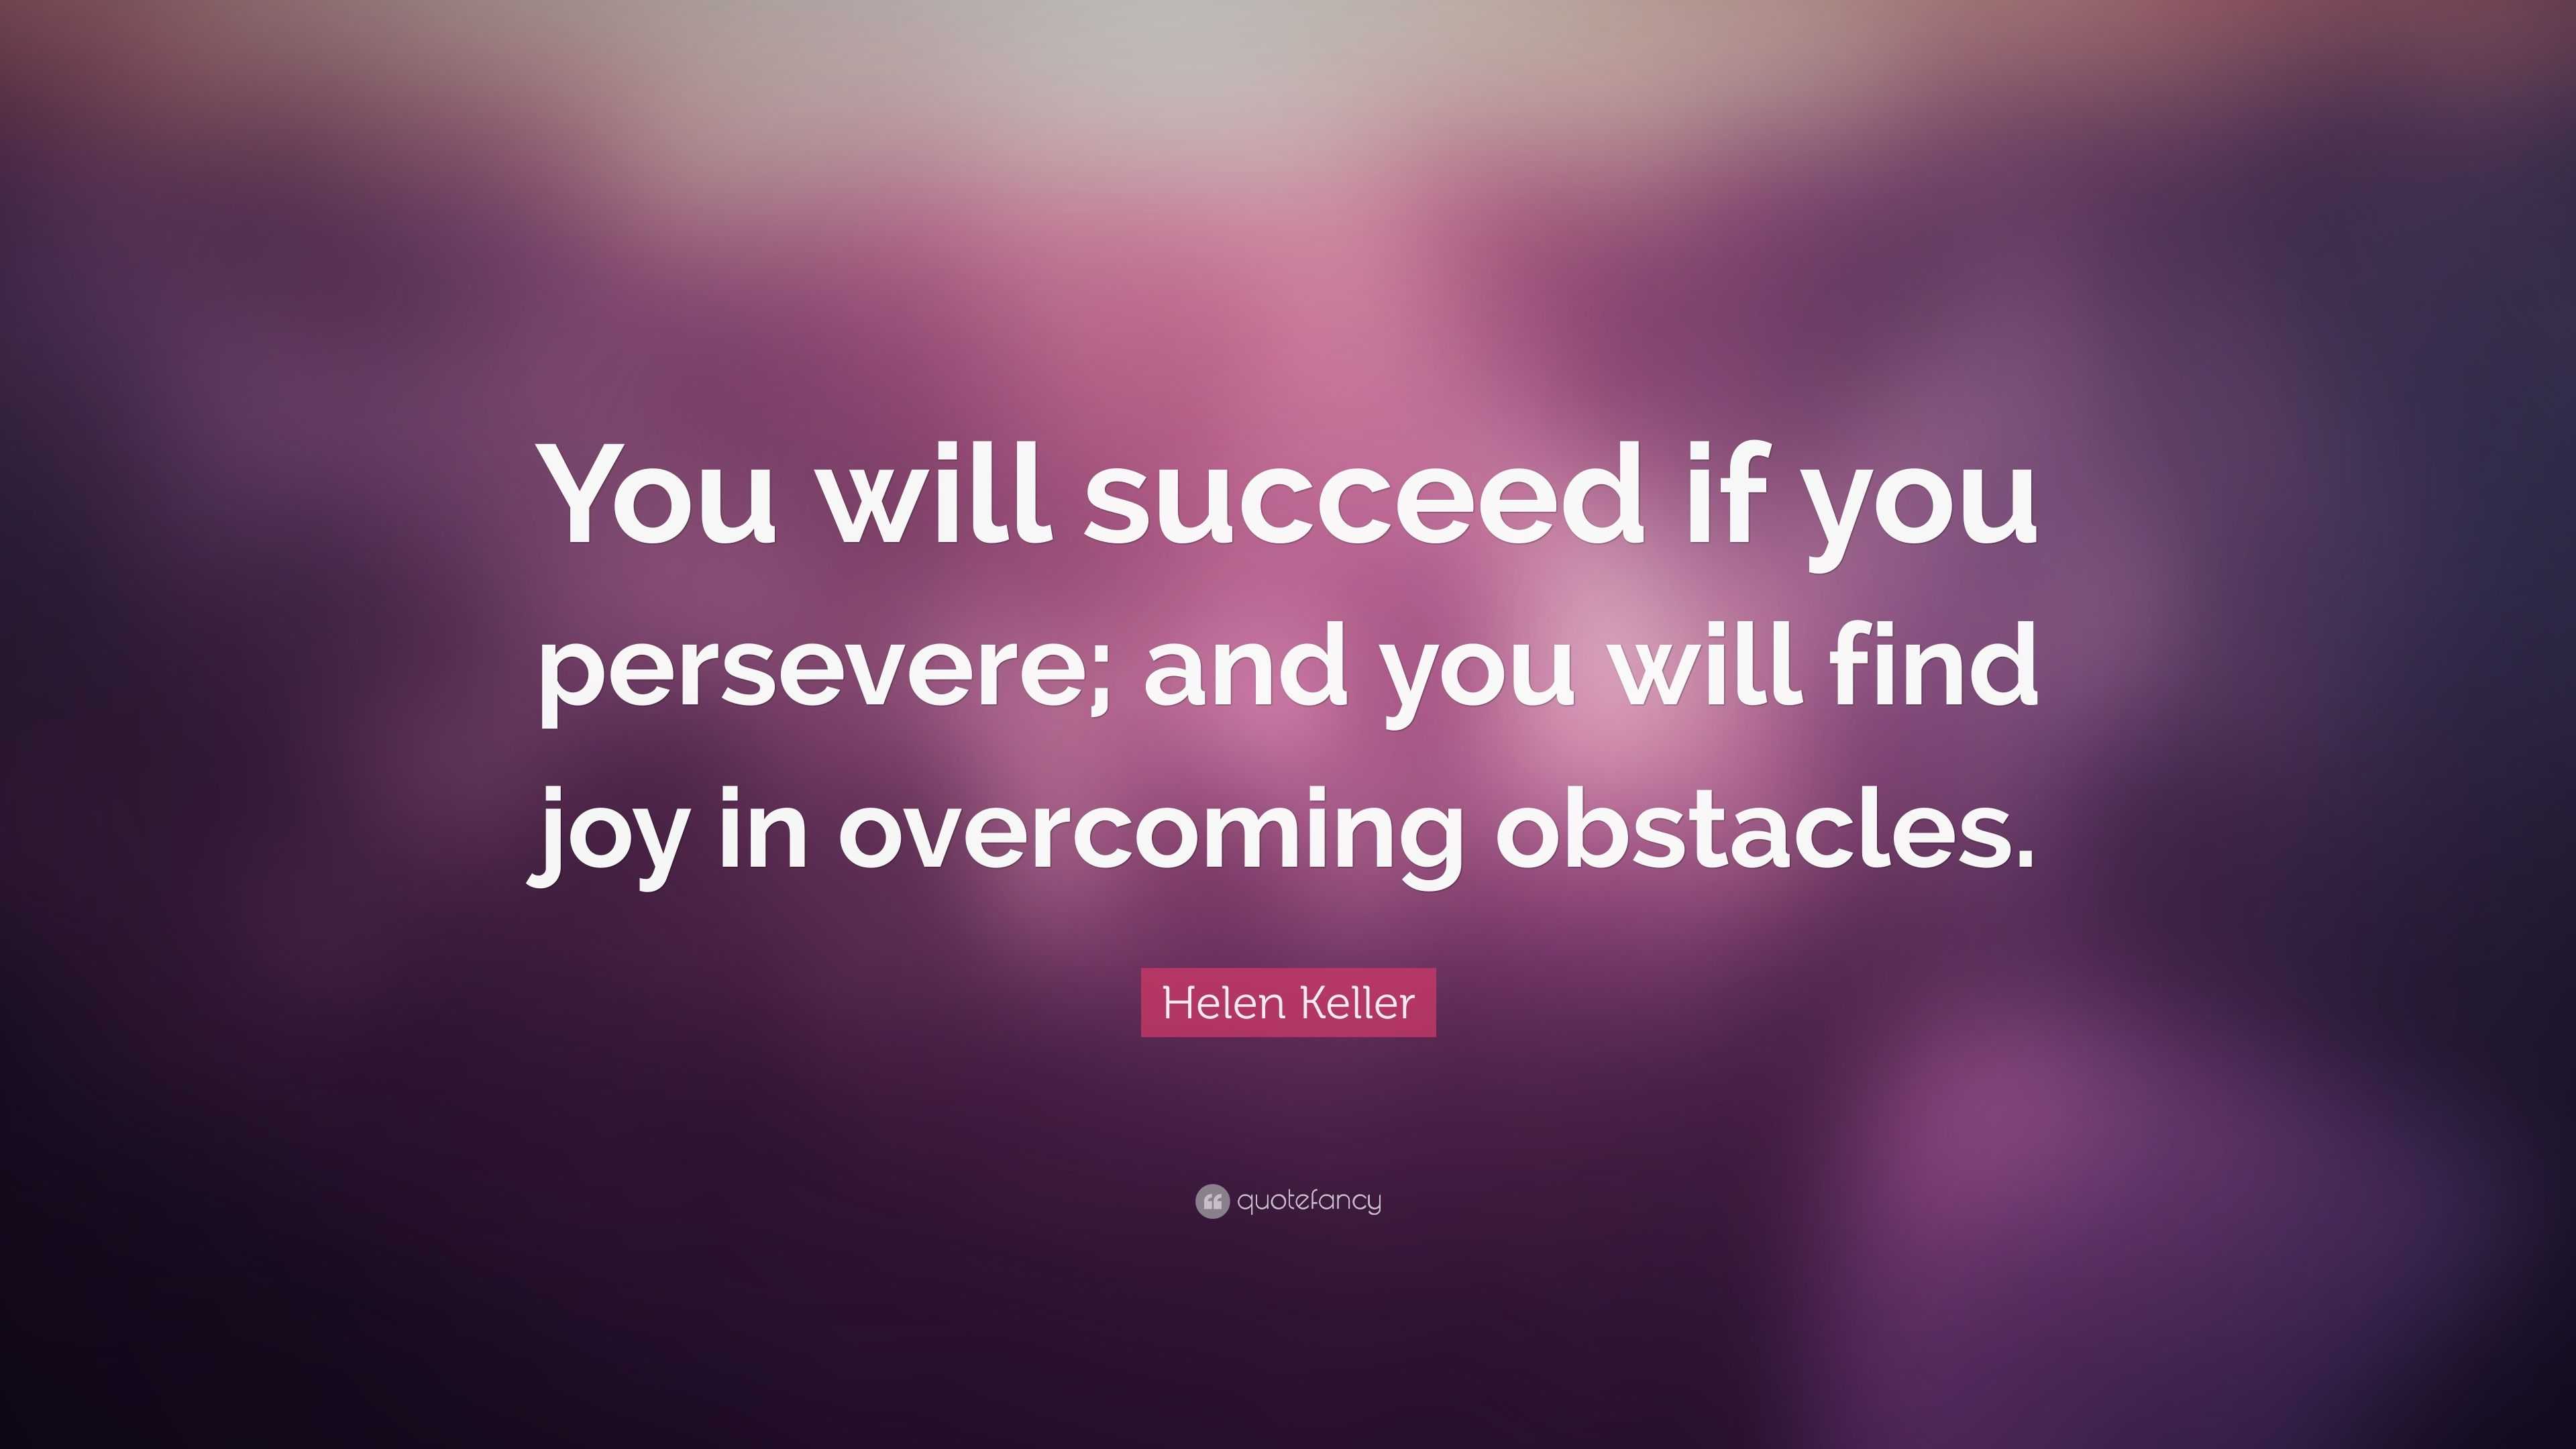 Helen Keller Quote: “You will succeed if you persevere; and you will ...